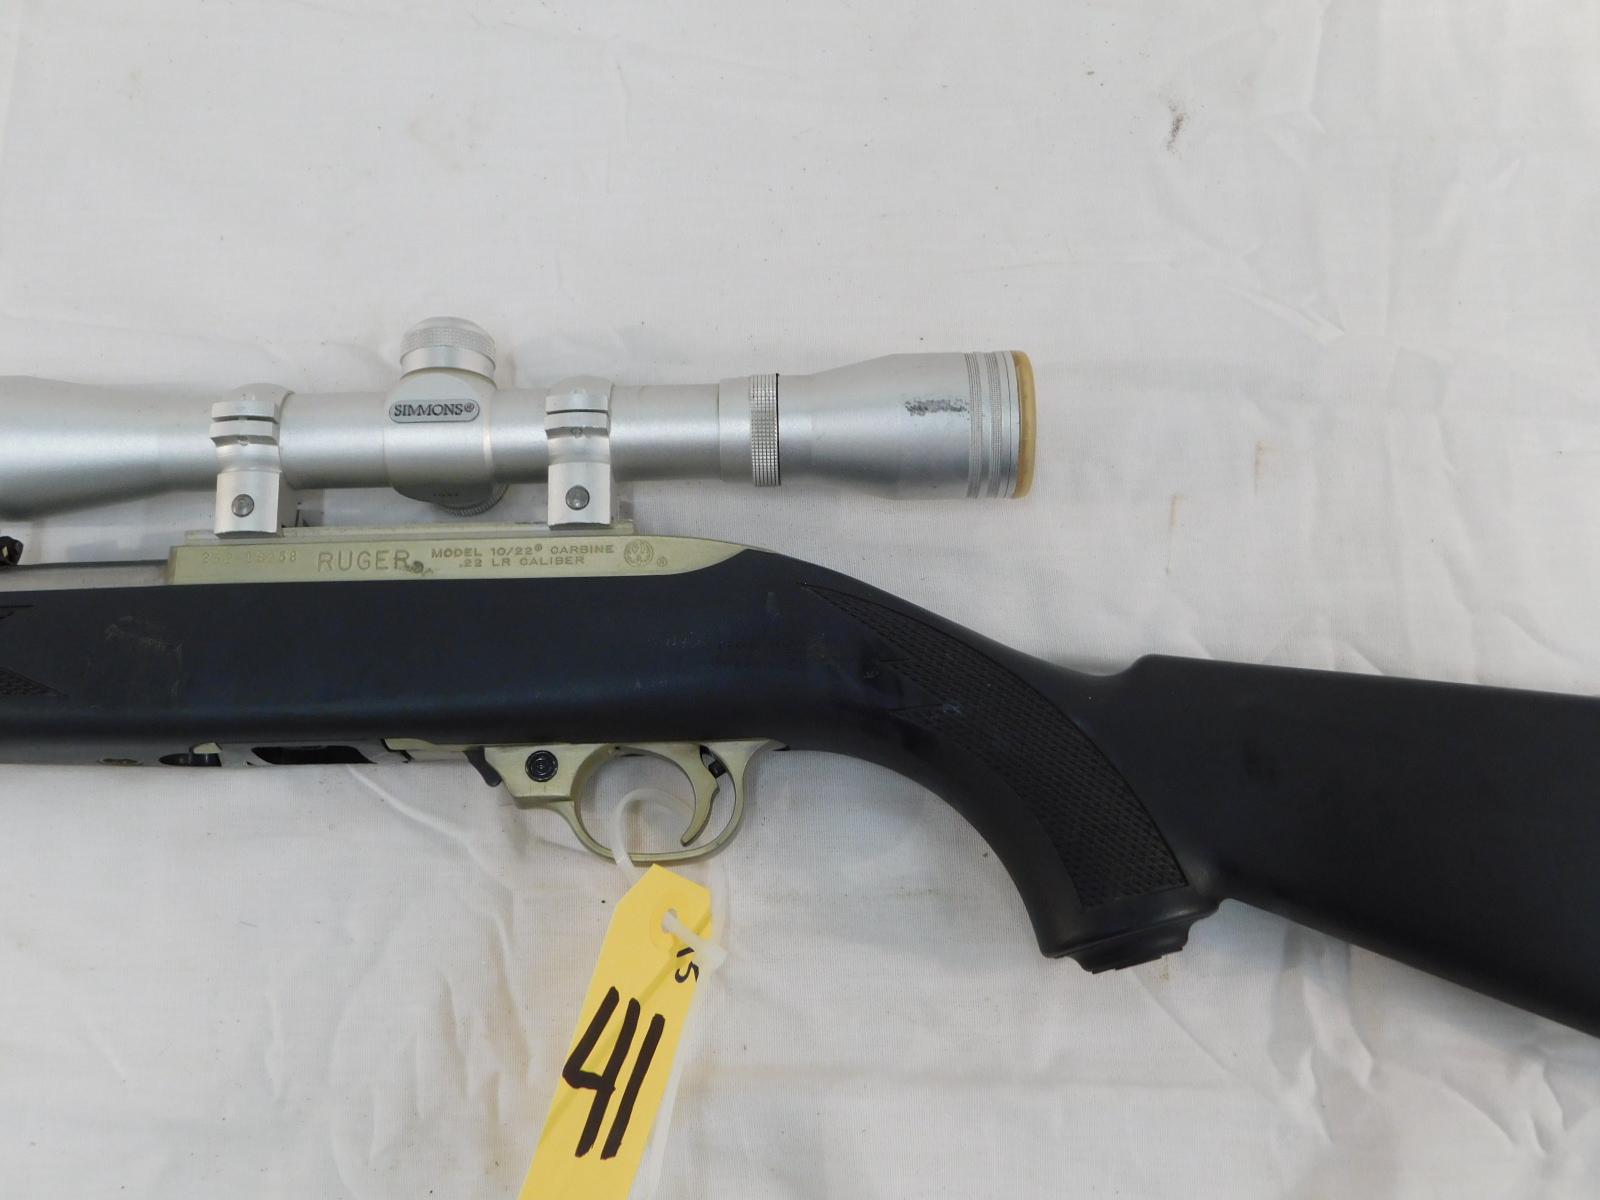 RUGER 10/22 .22LR CAL CARBINE W/ SIMMONS SCOPE